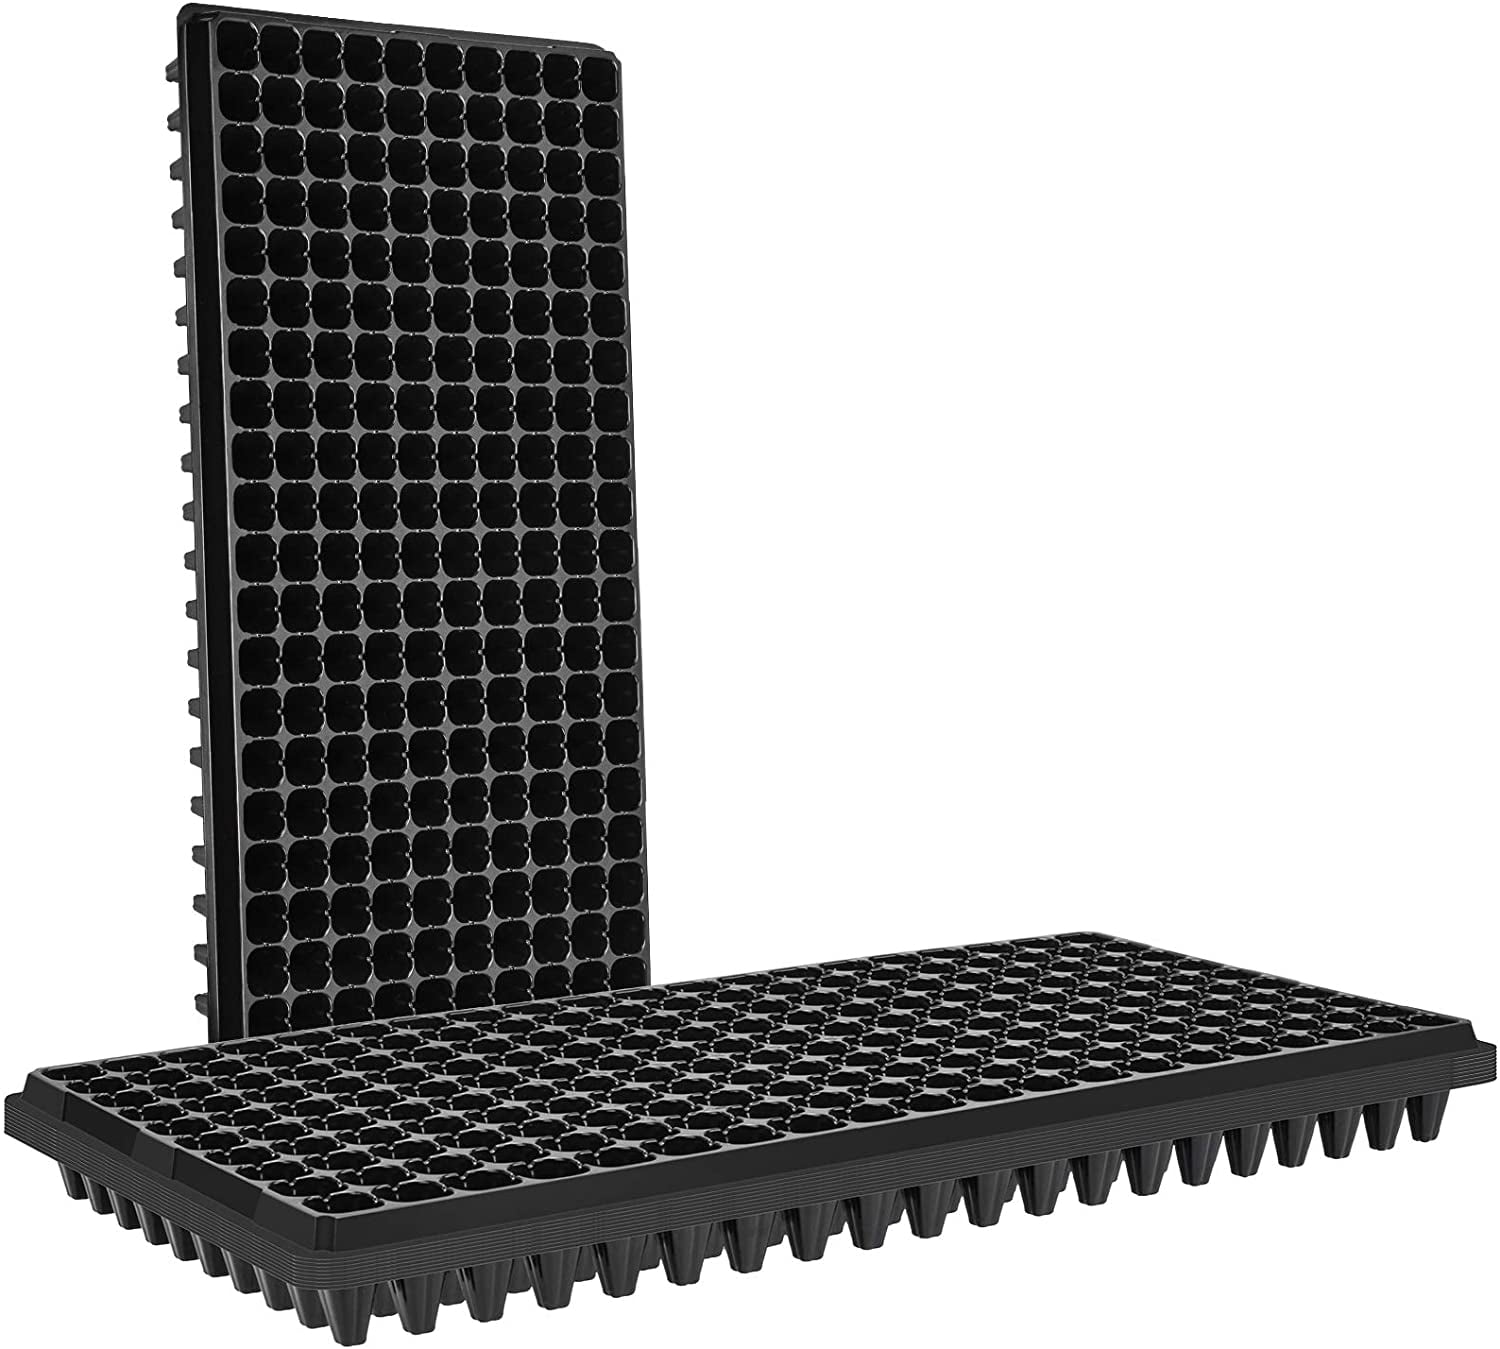 Reusable Seed Starter Kit 50 Cell Seedling Trays with Drain Holes 10 Pack Seed Starter Tray Gardening Plastic Tray Nursery Pots Mini Propagator Plant Grow Kit Plug Tray for Seedling Germination